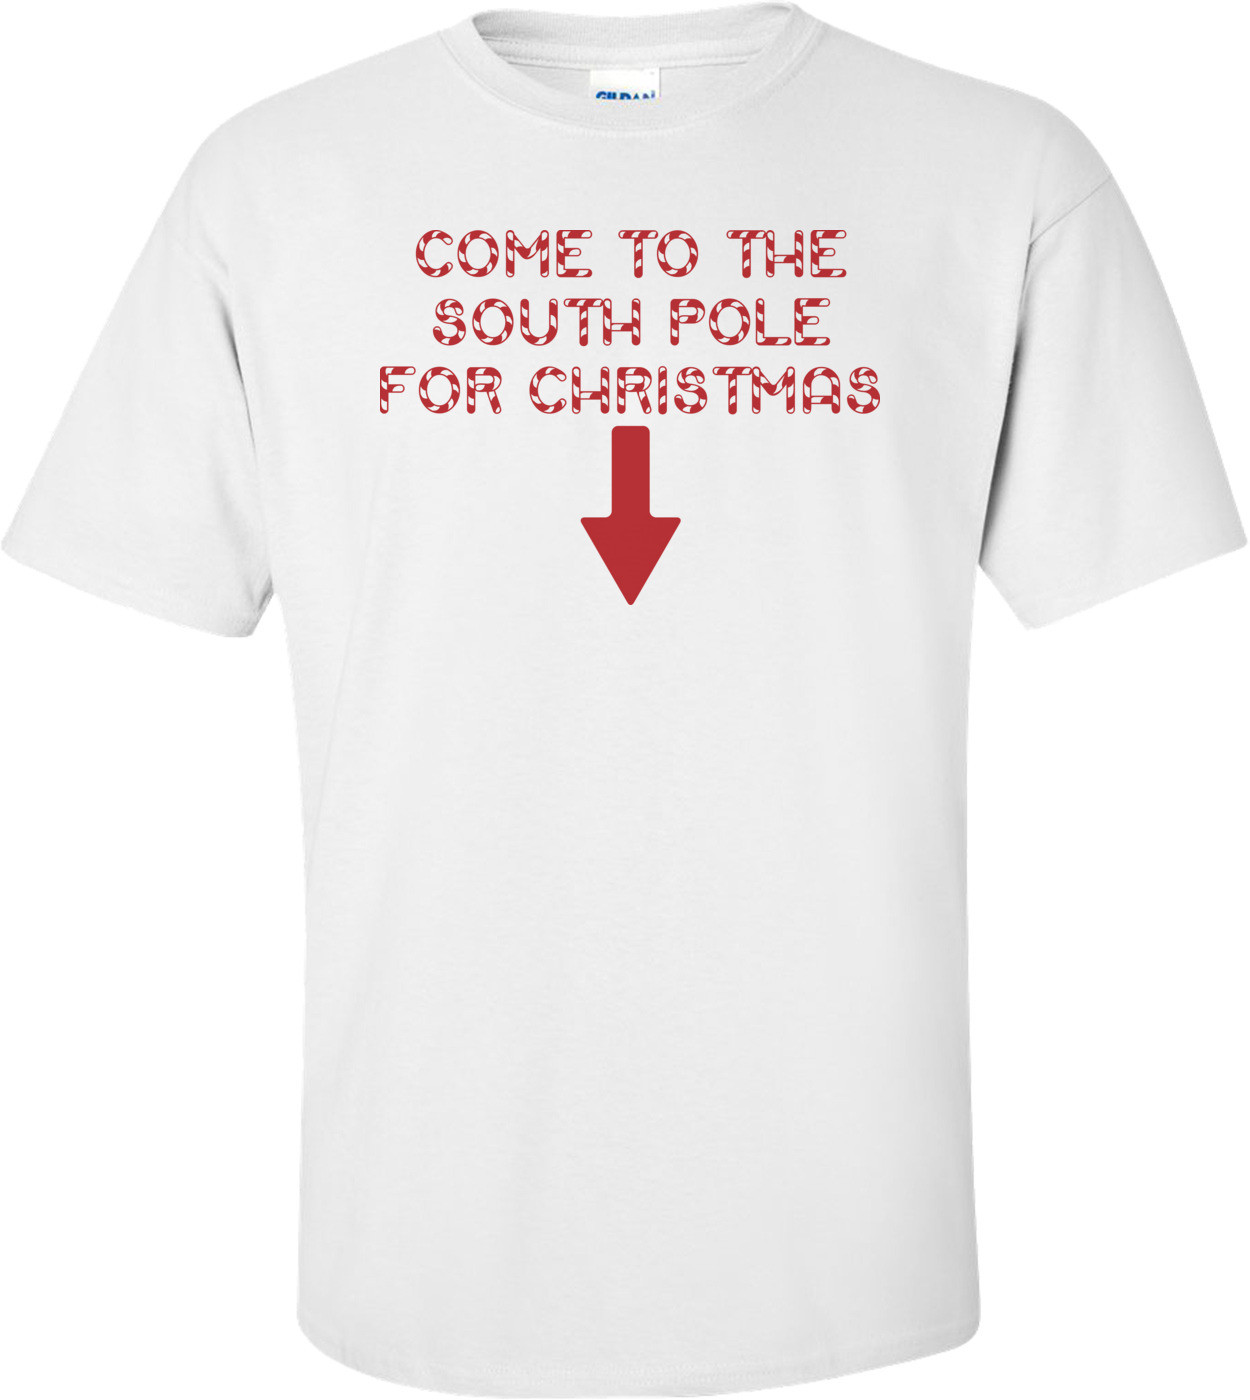 Come To The South Pole For Christmas T-shirt 